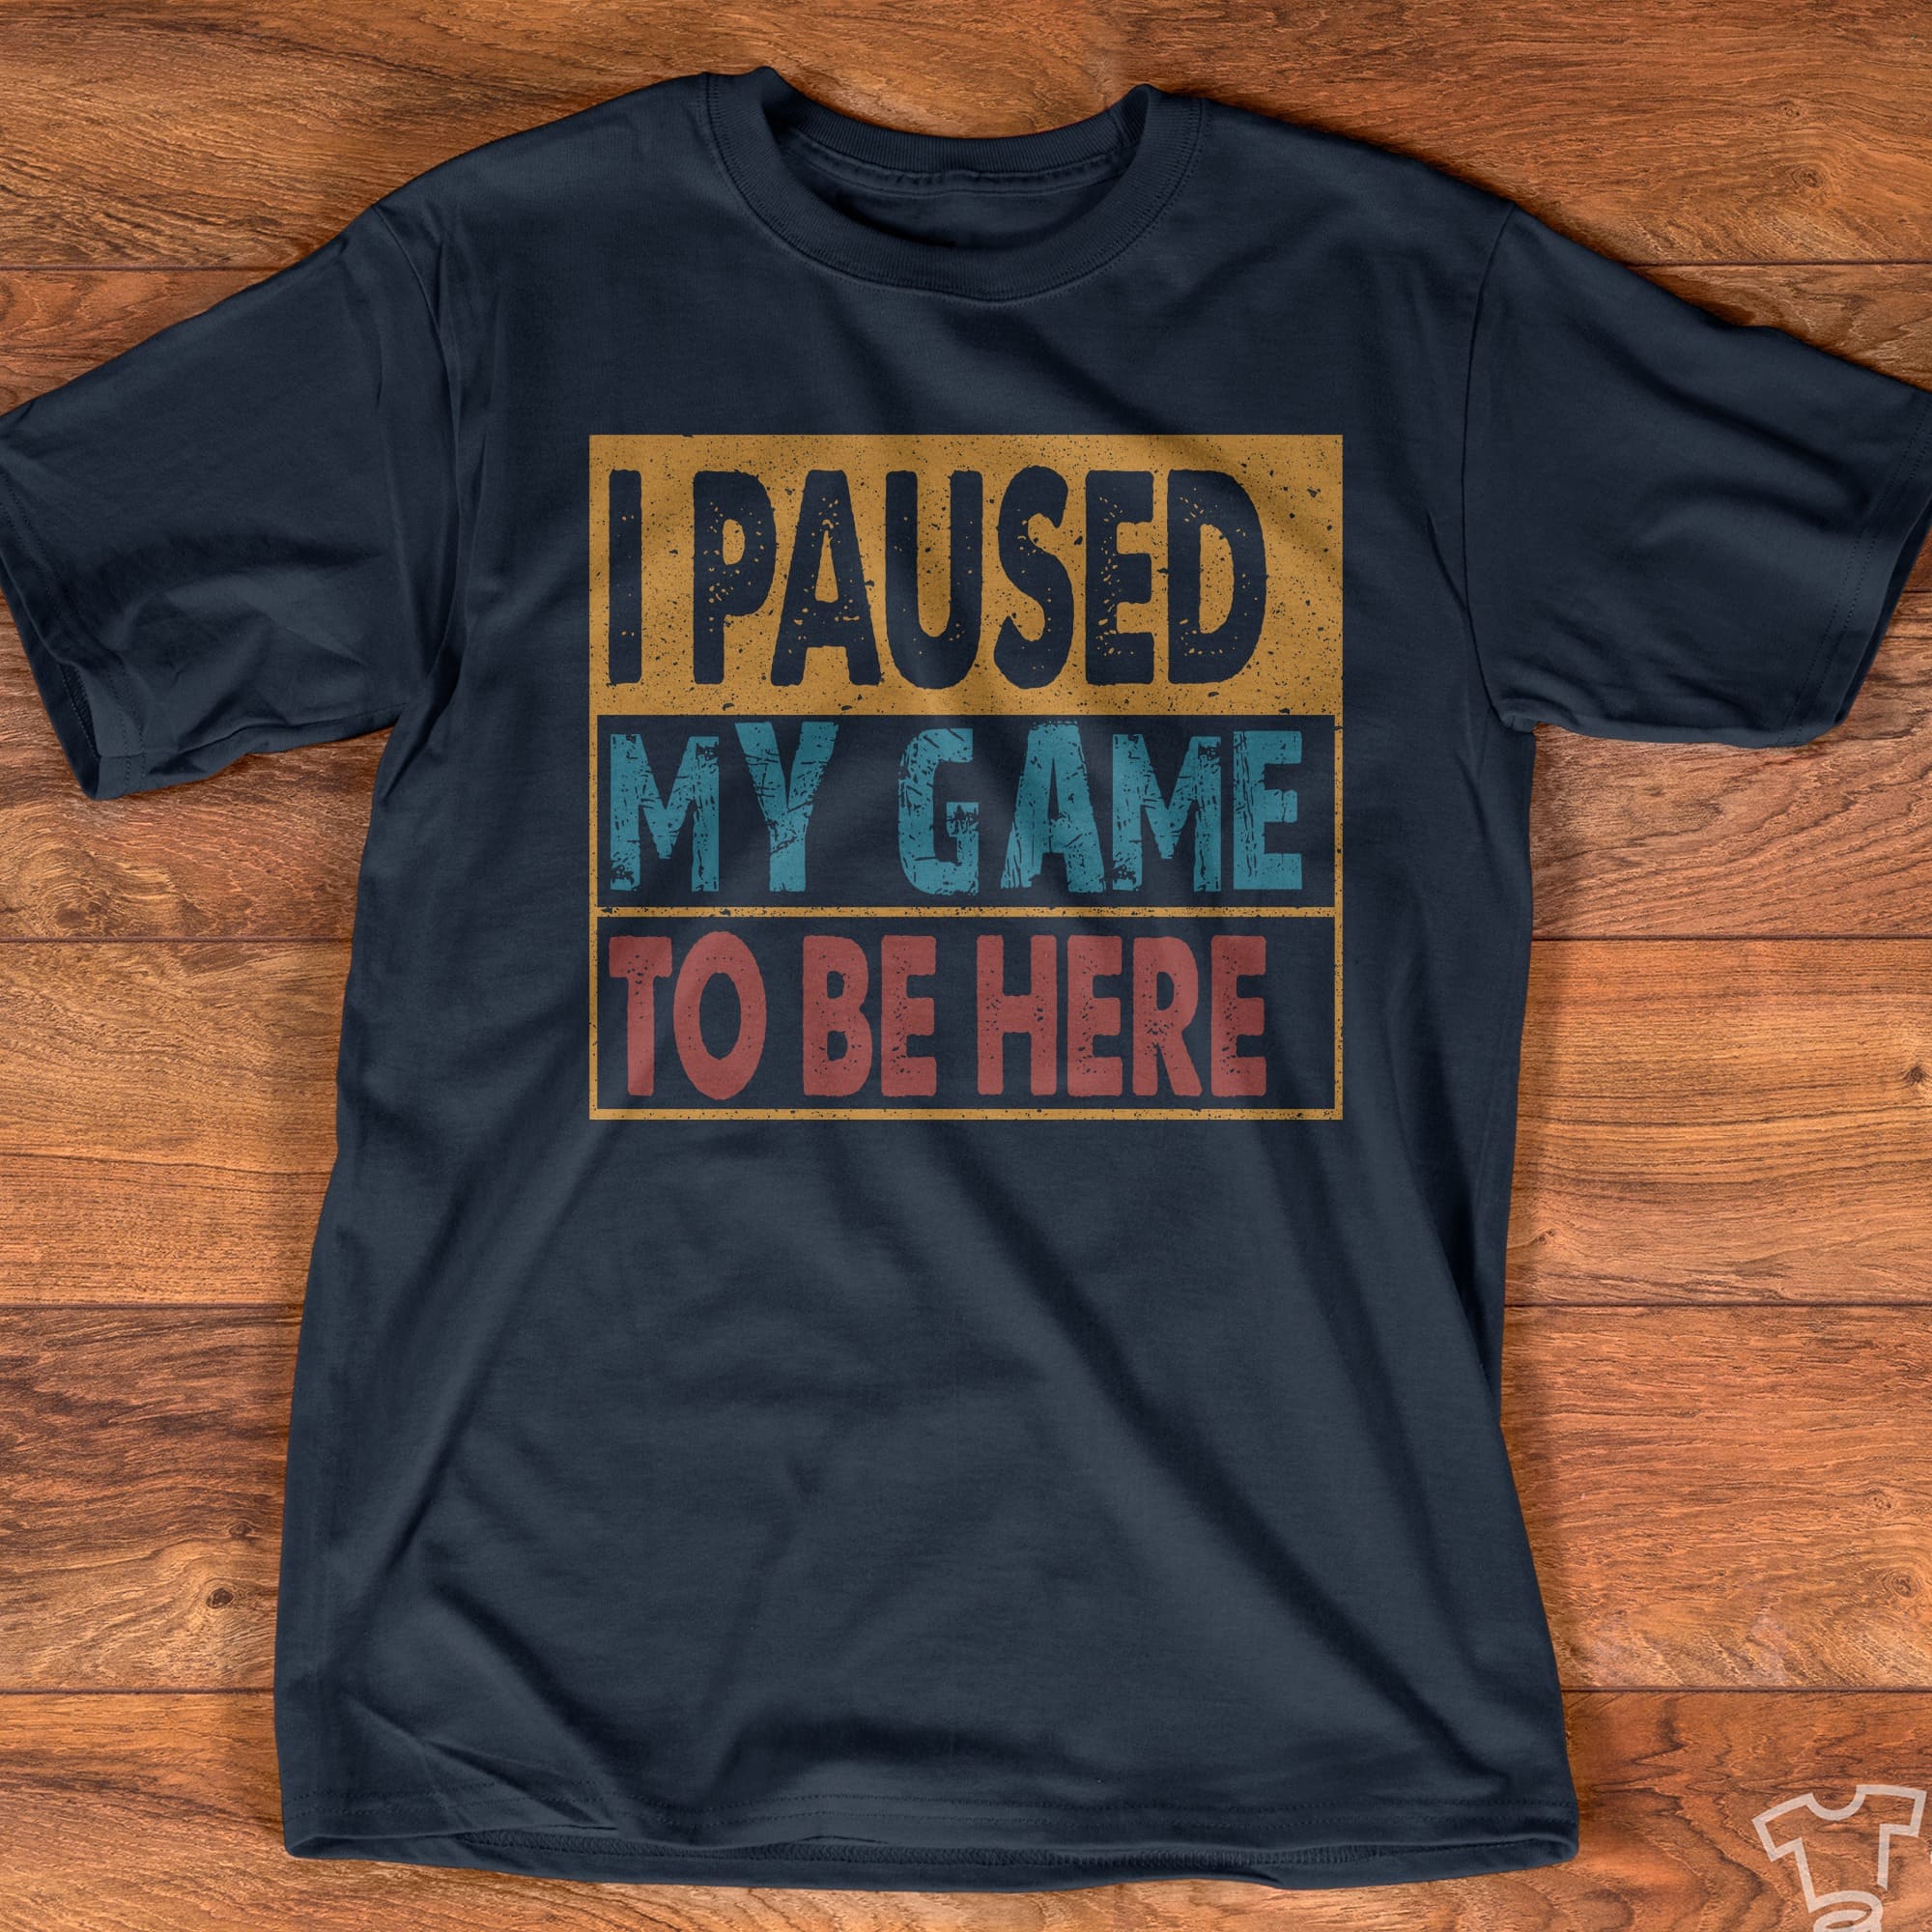 I paused my game to be here - Love playing game, T-shirt for gamers